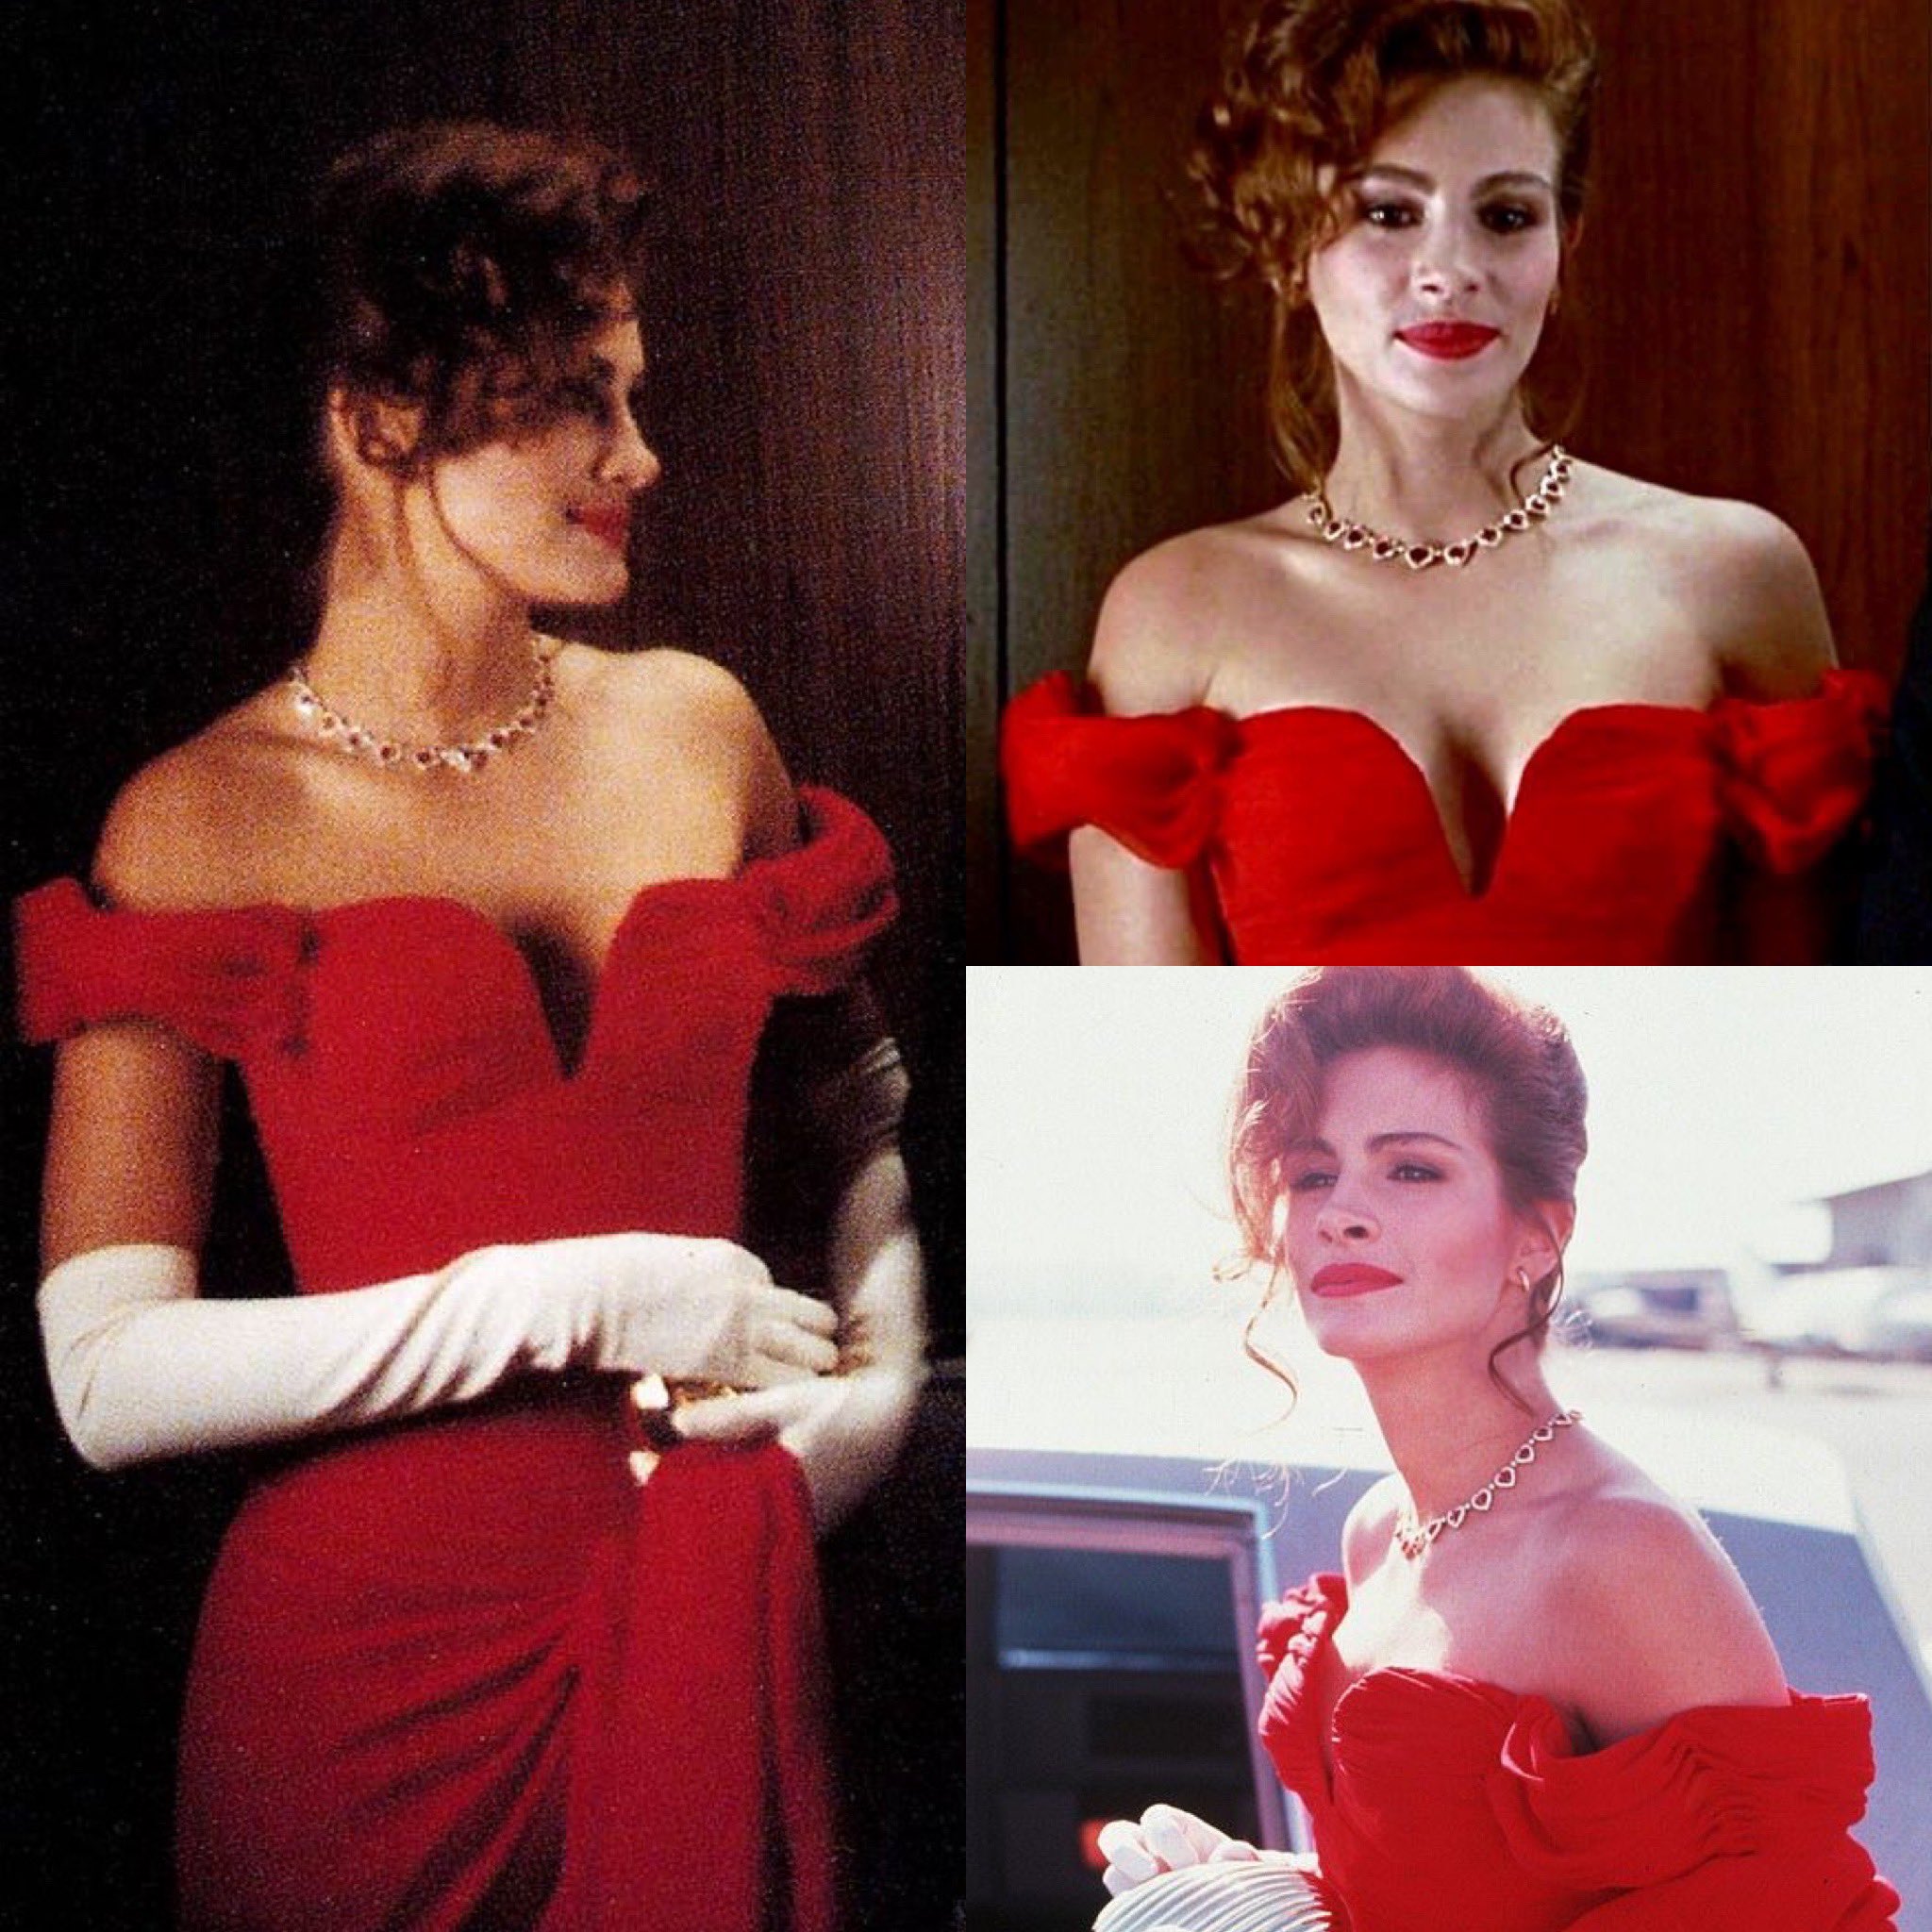 FOUND COLOR PHOTO R_0425 PRETTY WOMAN IN RED DRESS AND GLOVES | eBay